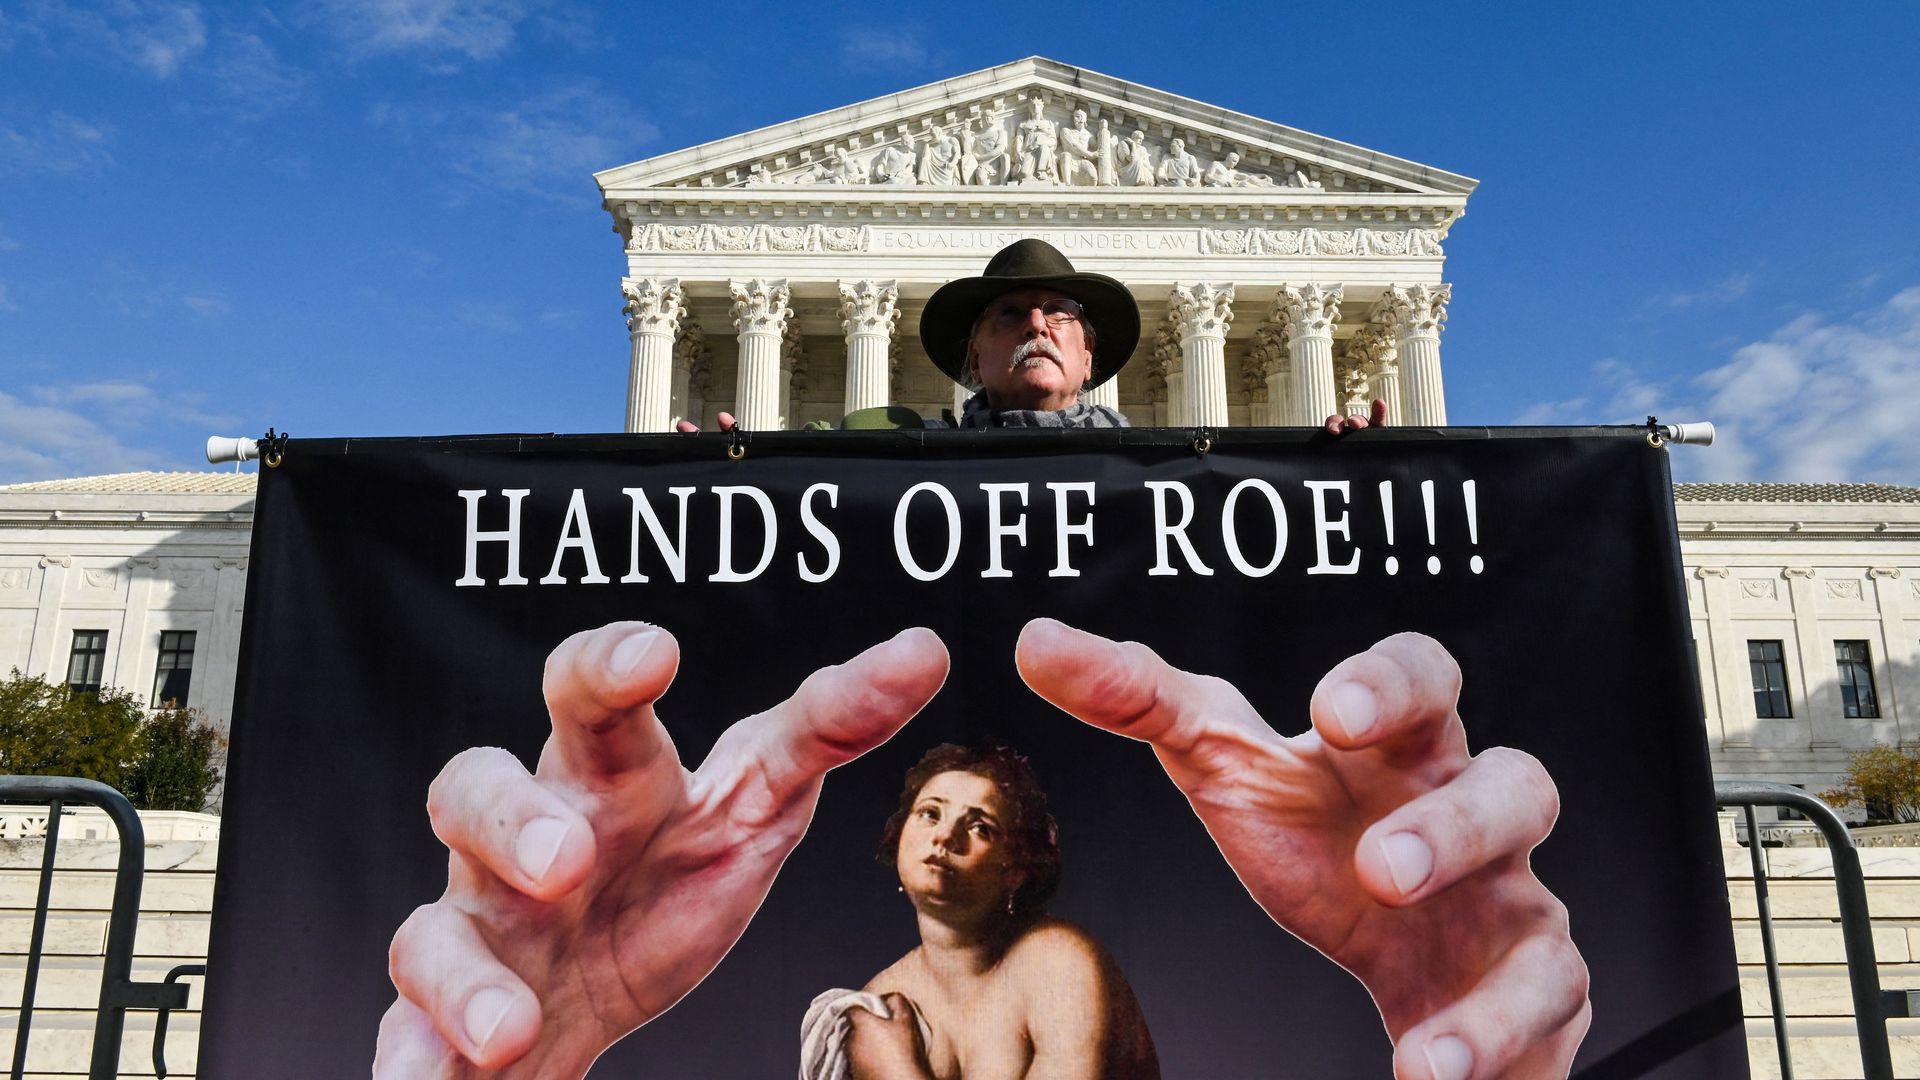 A man protesting a challenge to abortion rights is seen standing with a "Hands Off" sign outside the Supreme Court.